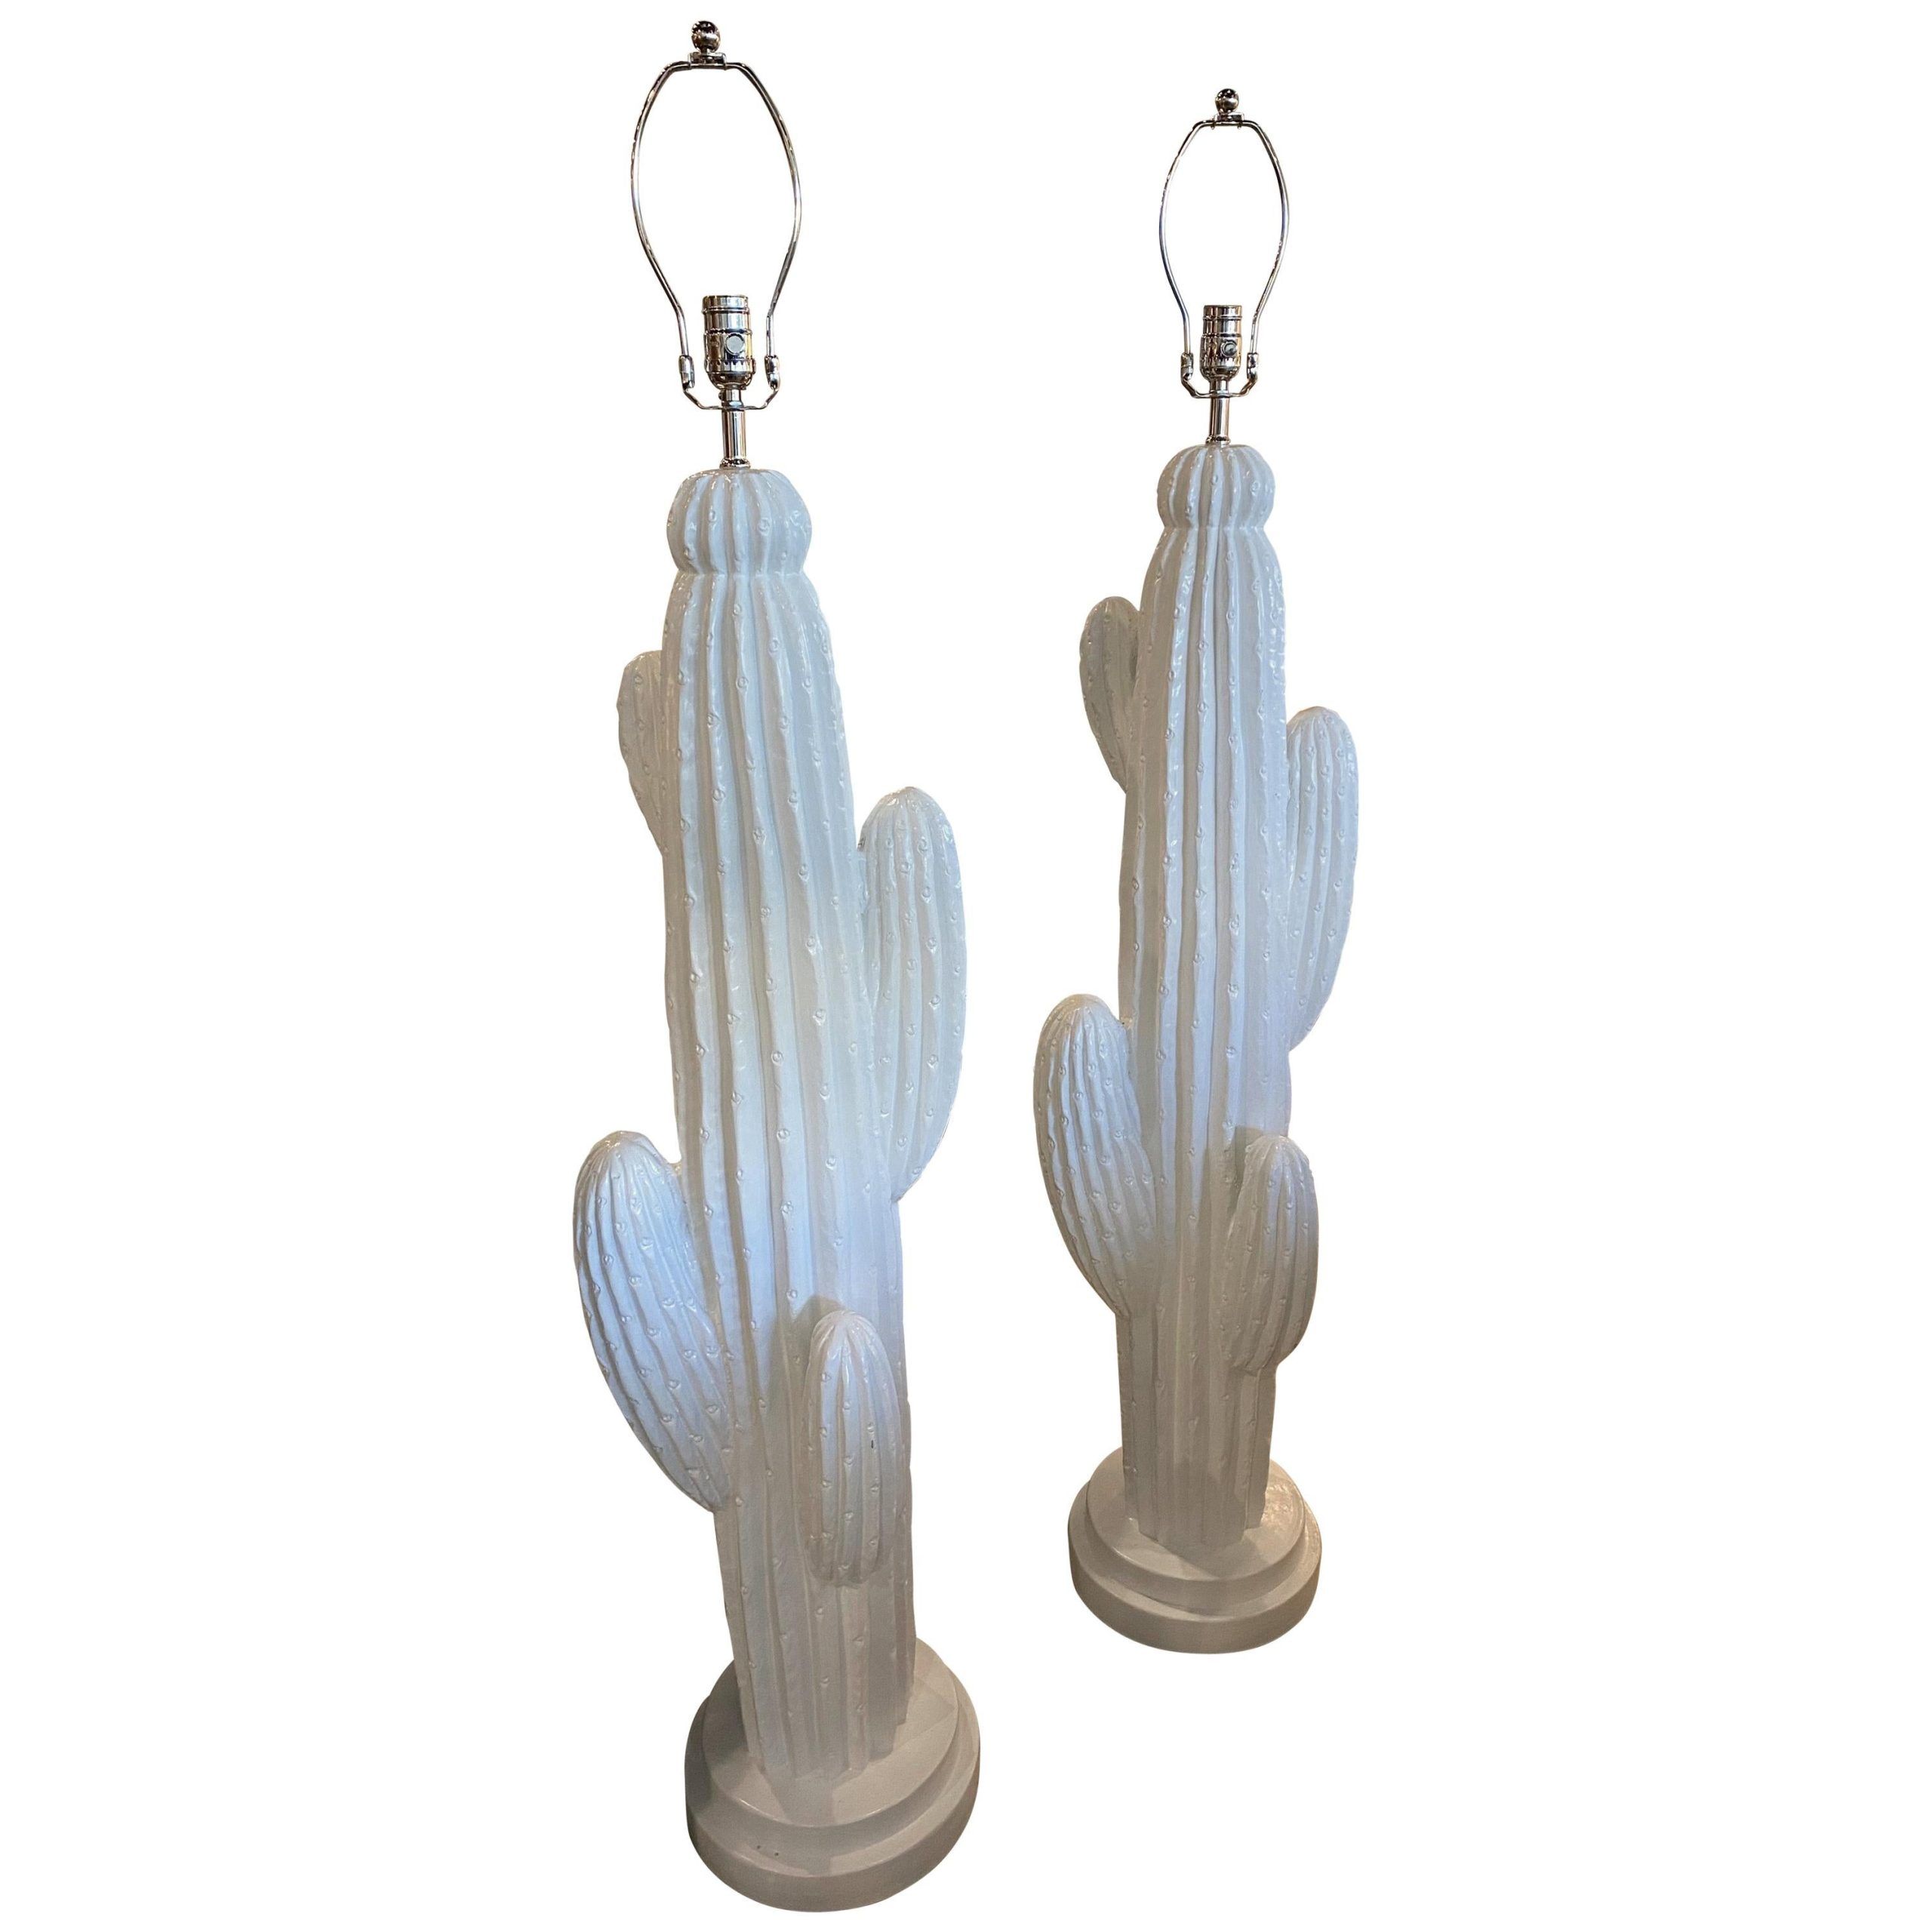 Cactus Standing Lamps Pertaining To Well Liked Vintage Plaster Cactus Floor Lamps Modern Palm Springs Chrome Two Available  For Sale At 1stdibs (View 7 of 10)